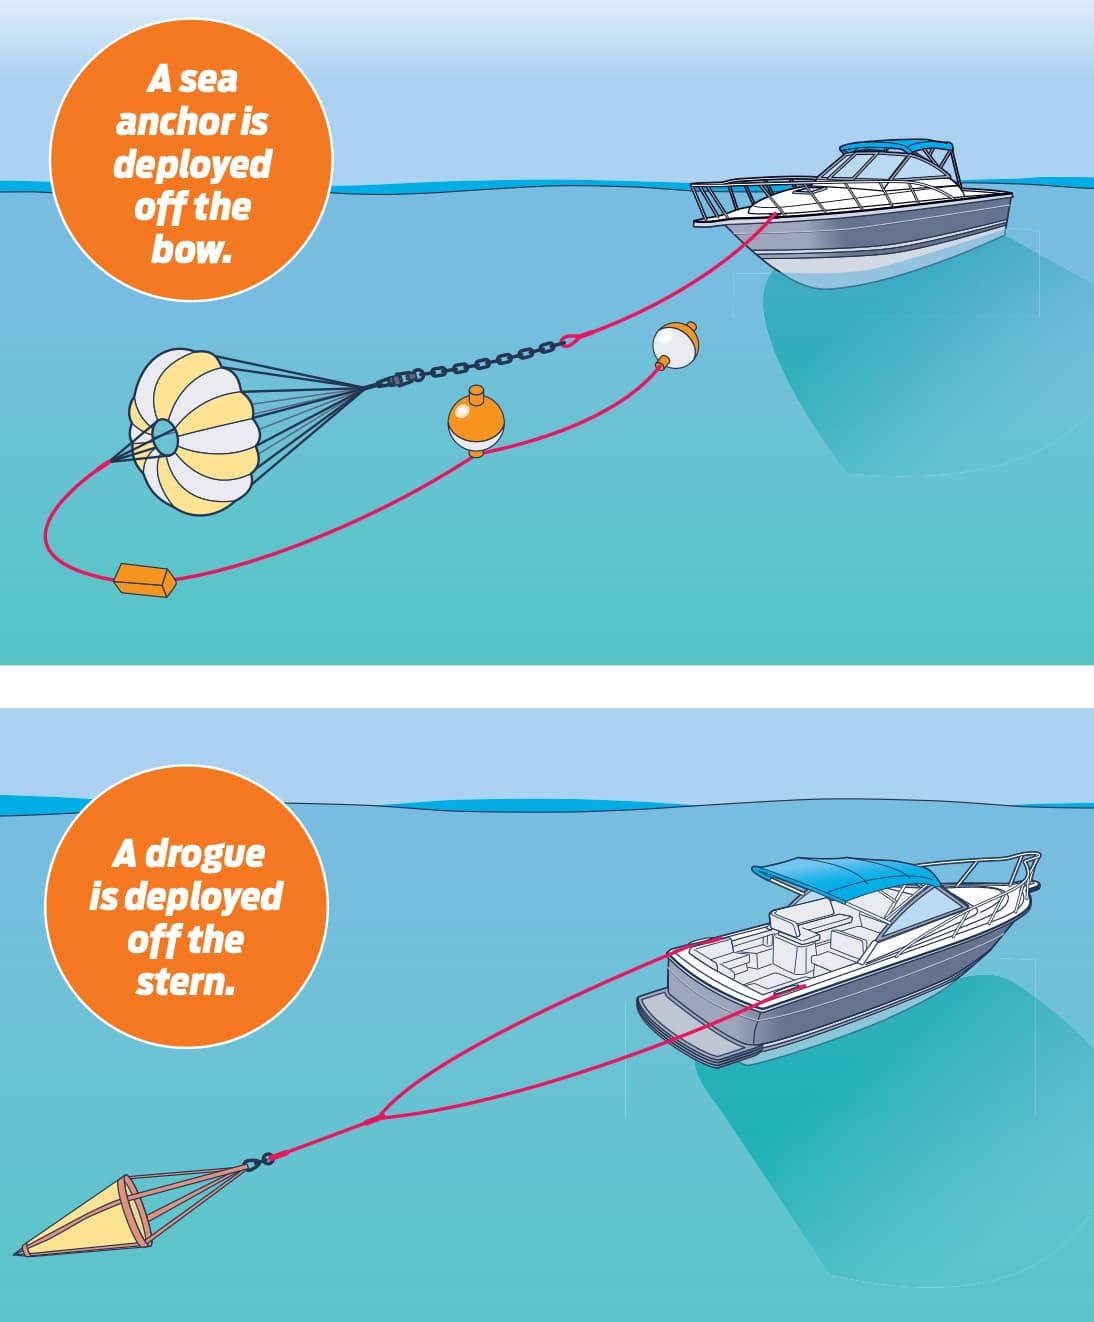 Steering, When Power Steering Fails, Boating Mag, Currents, Wind, Boat Handling